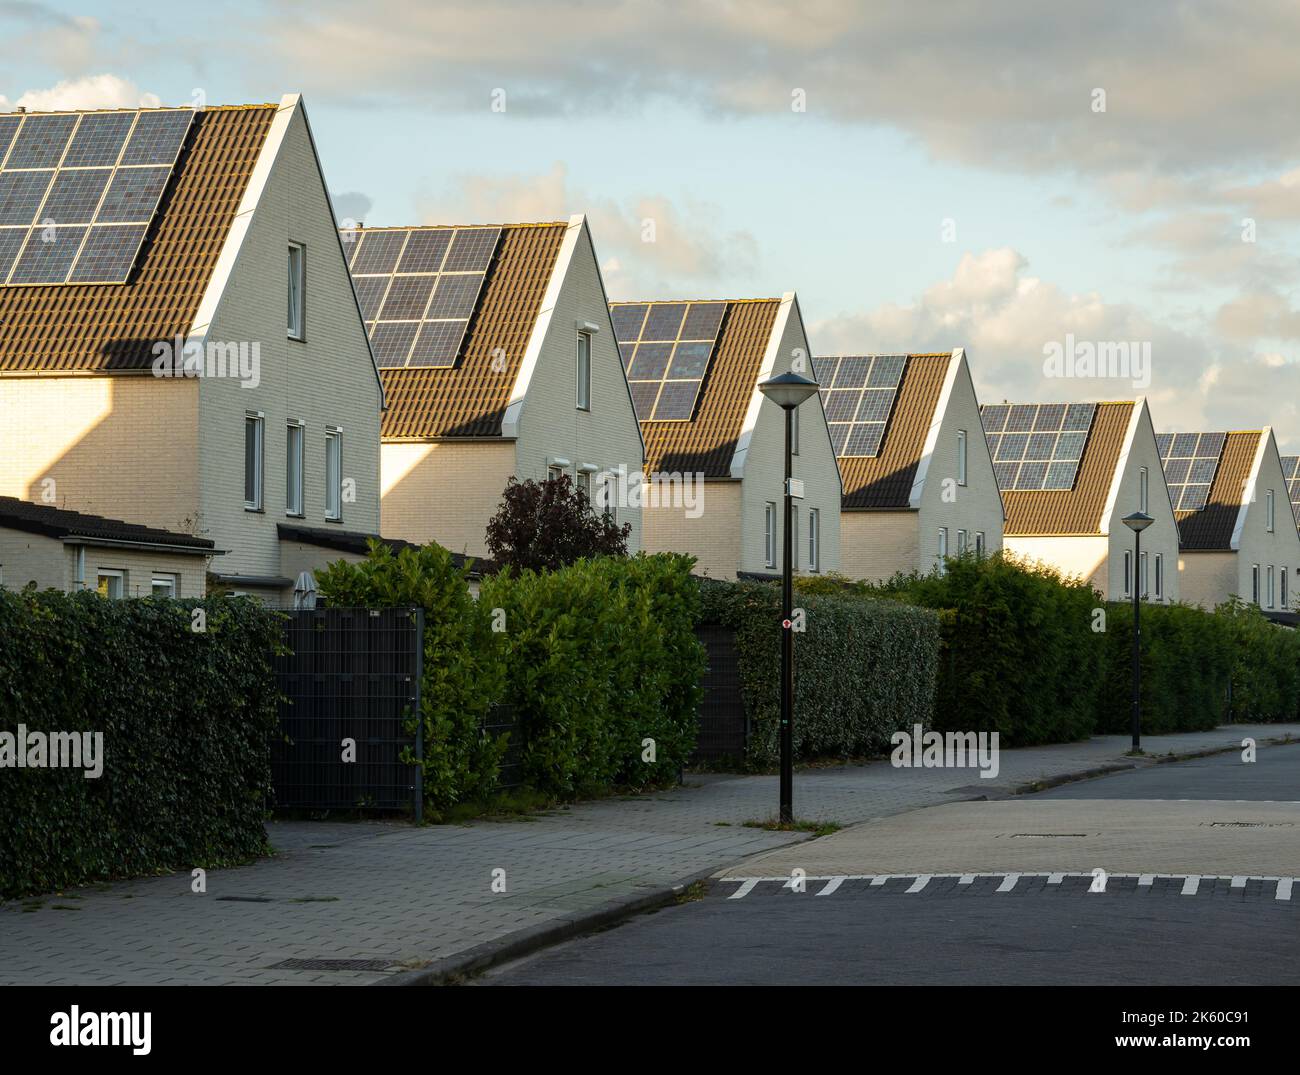 Modern houses in a row with solar panels on the roof in largest photovoltaic neighbourhood of The Netherlands in Heerhugowaard Stock Photo